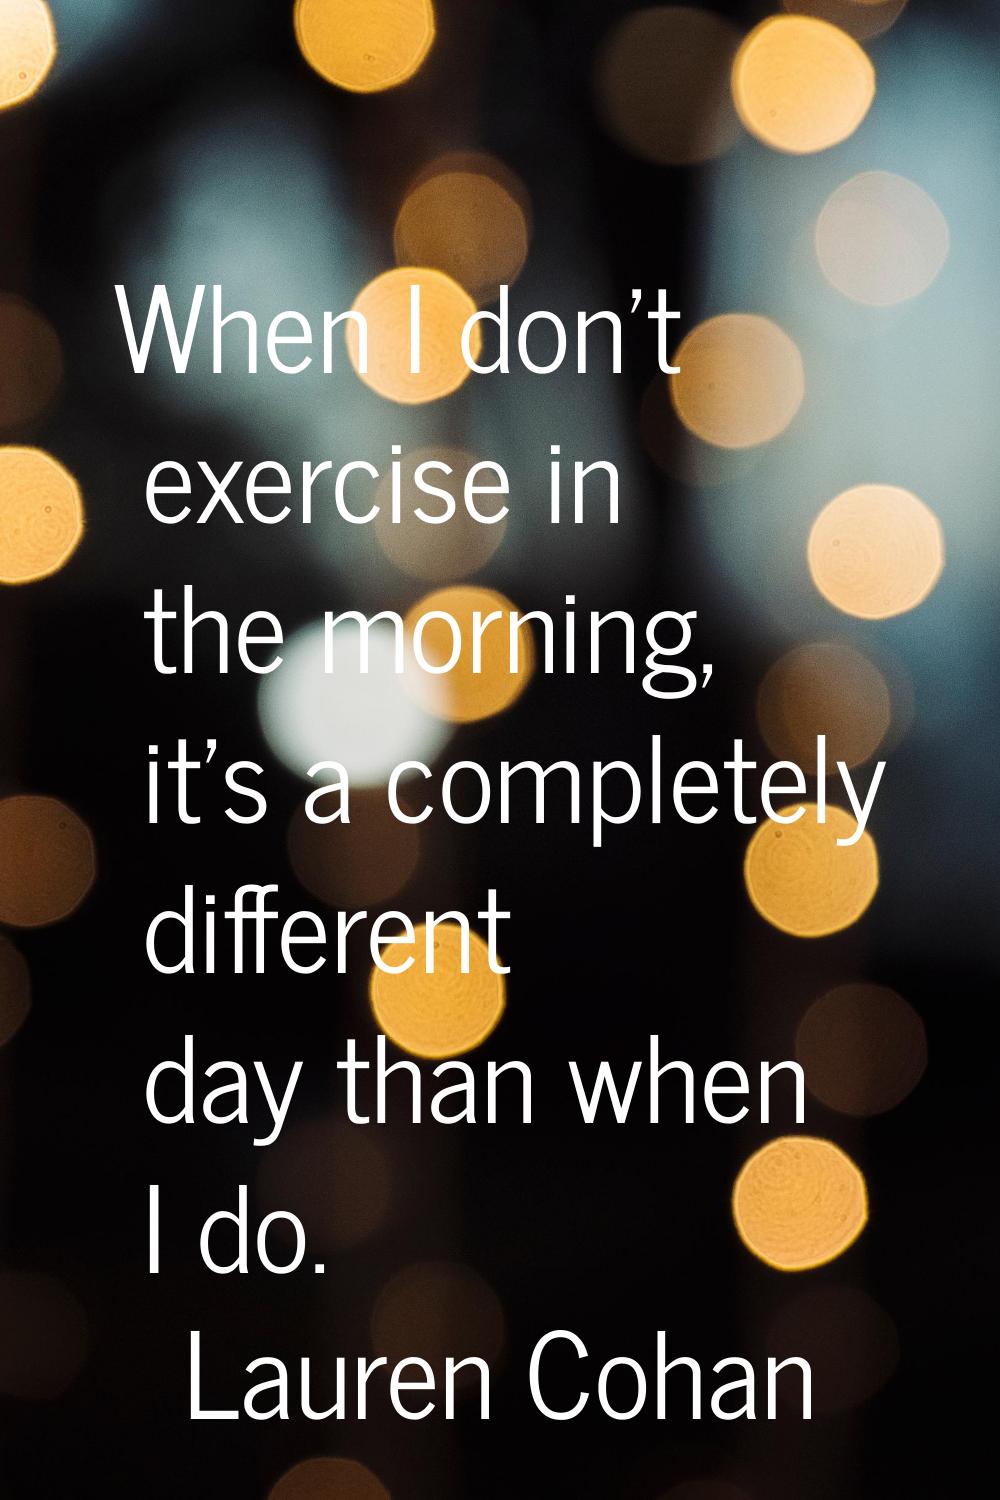 When I don't exercise in the morning, it's a completely different day than when I do.